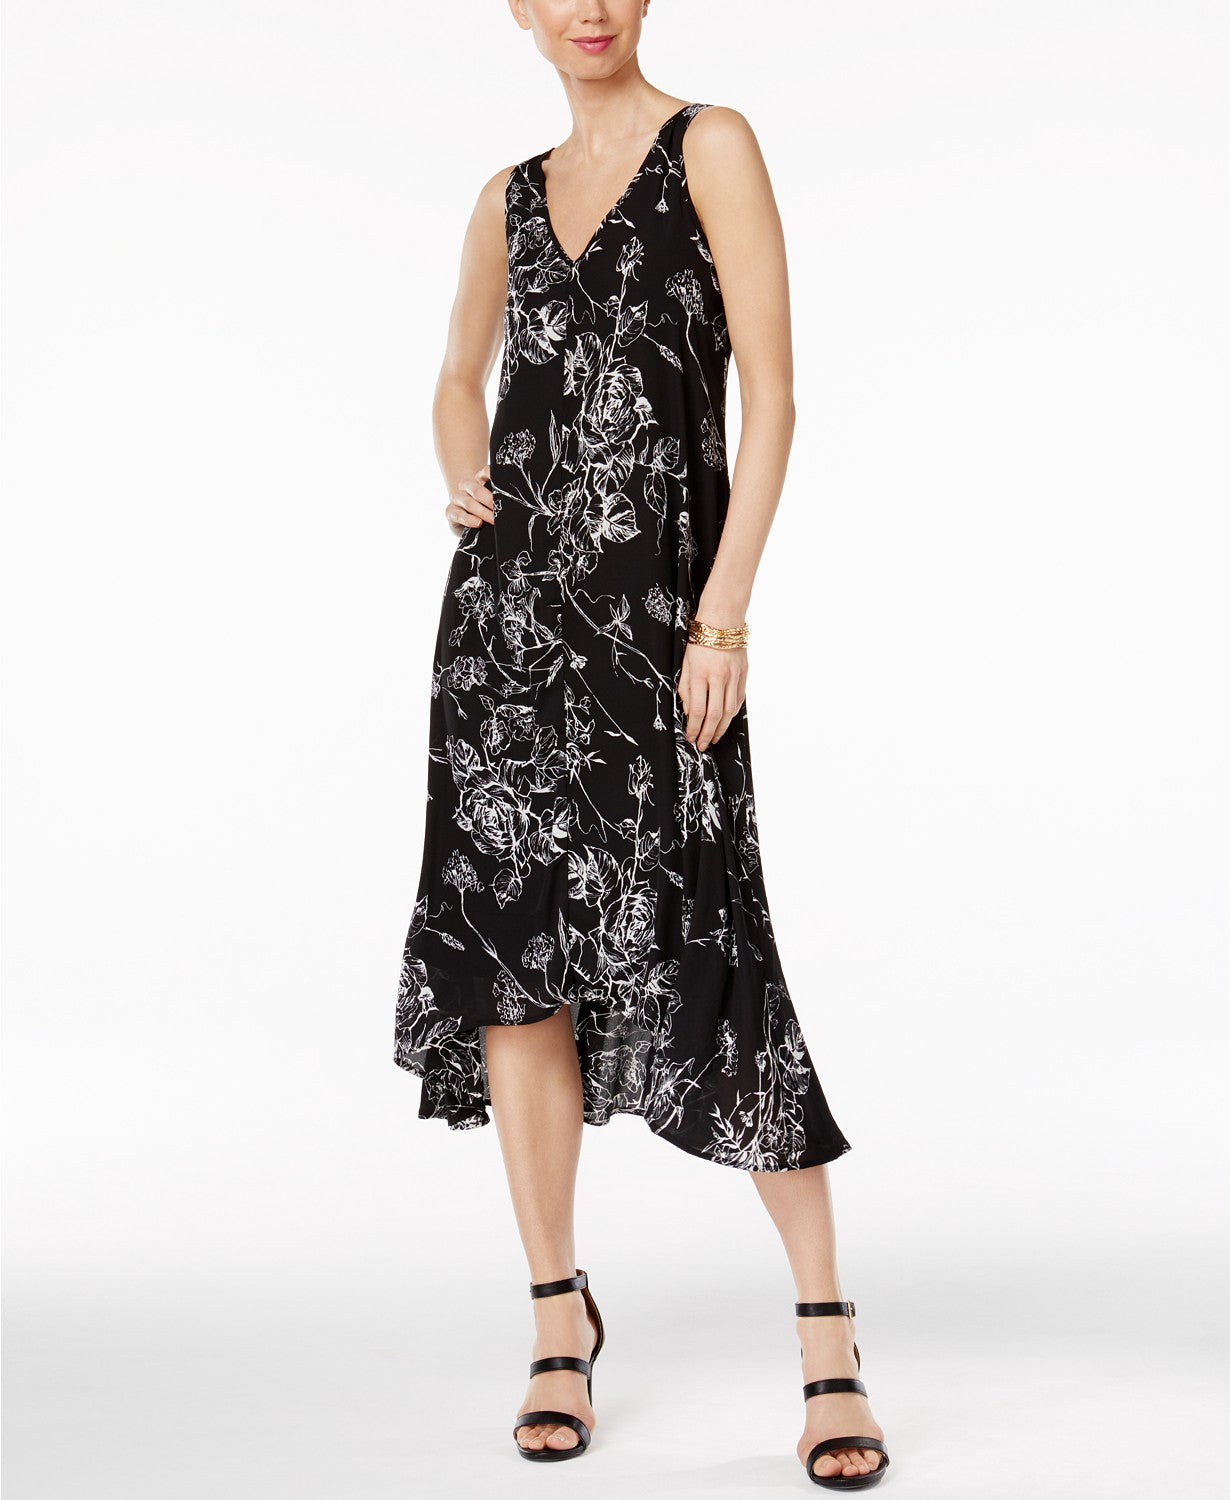 Olivia Grace Printed High-Low Midi Dress BlackWhite Etched Floral XS